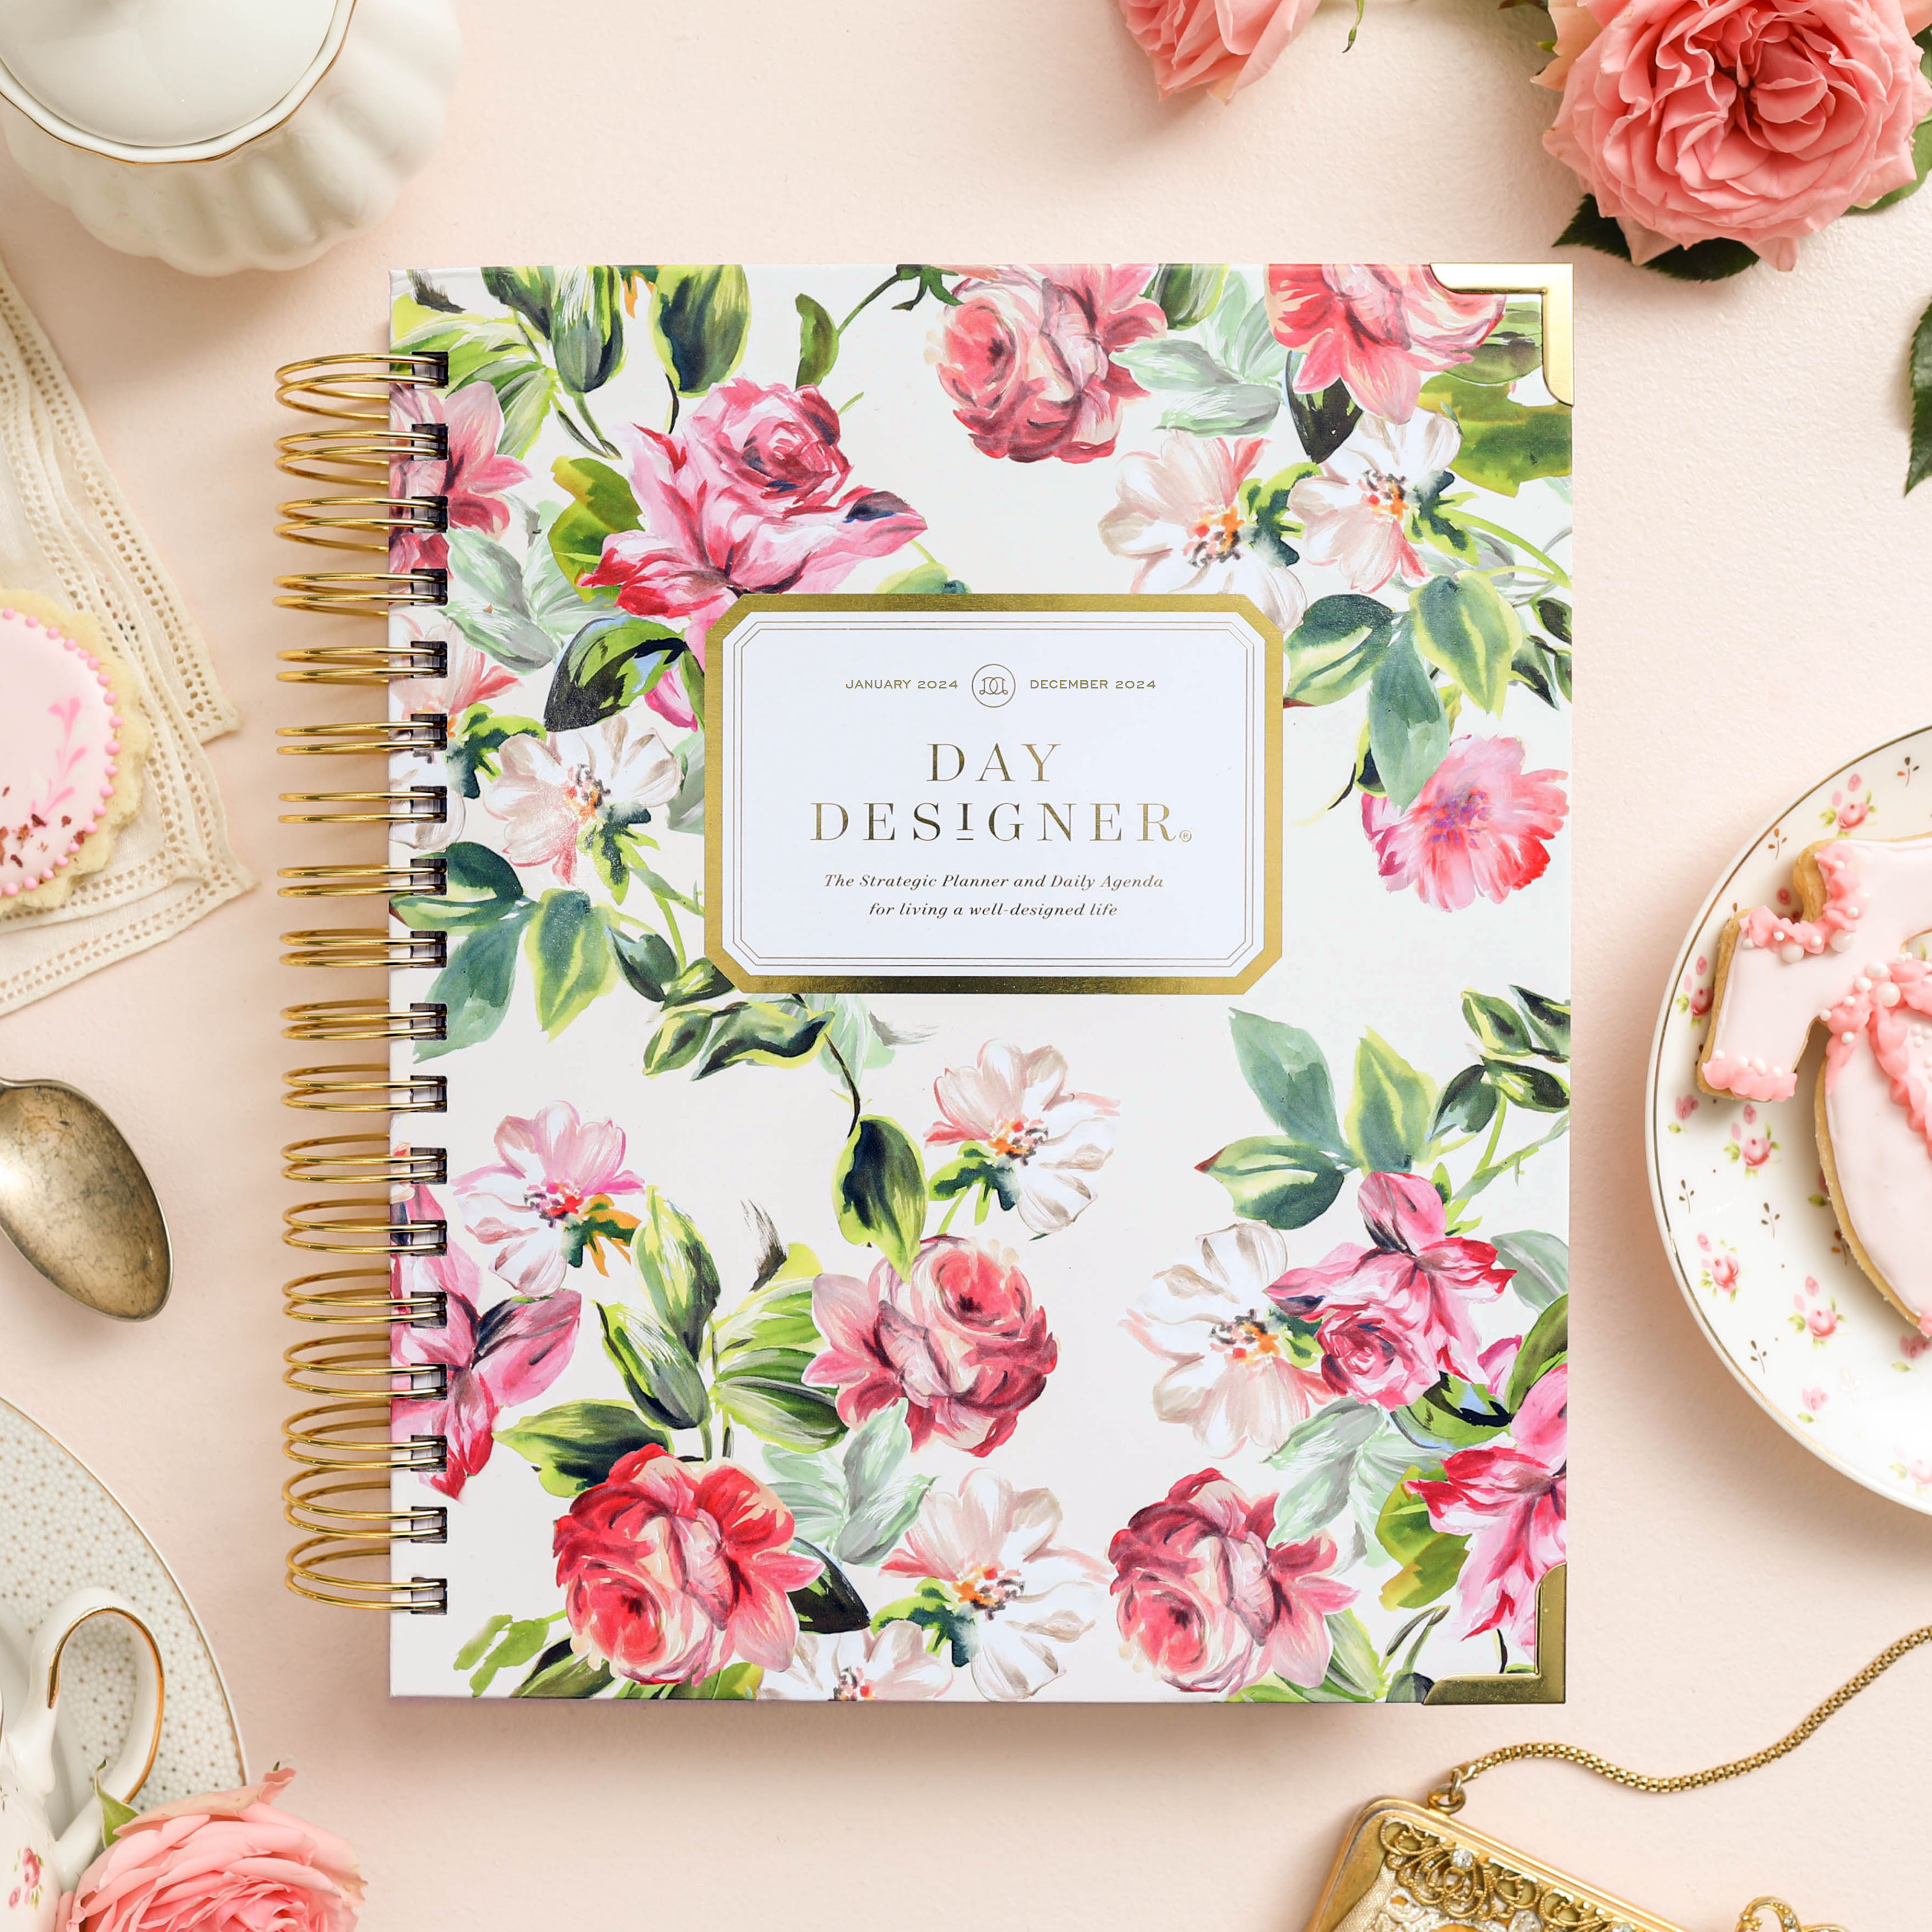 Mr. Wonderful, Wonder Planner 2023-2024 Pink Diary, Every Day Can Be My Day